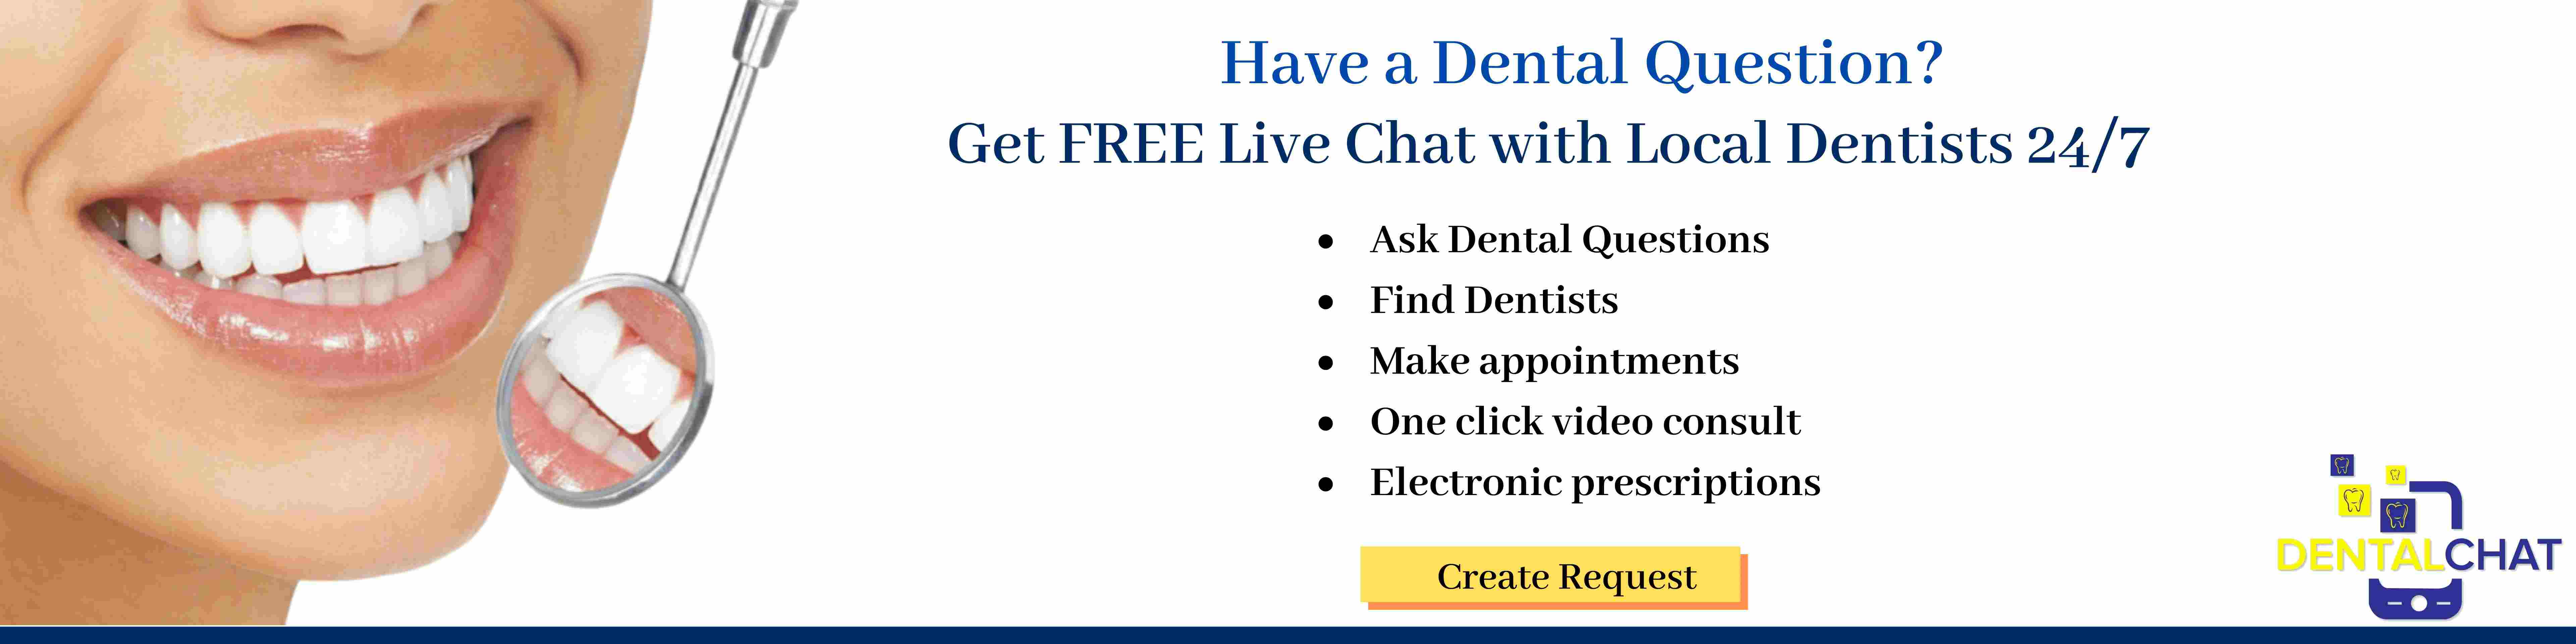 Best Emergency Dentist Consult, Local Urgent Dentists Questions Online 